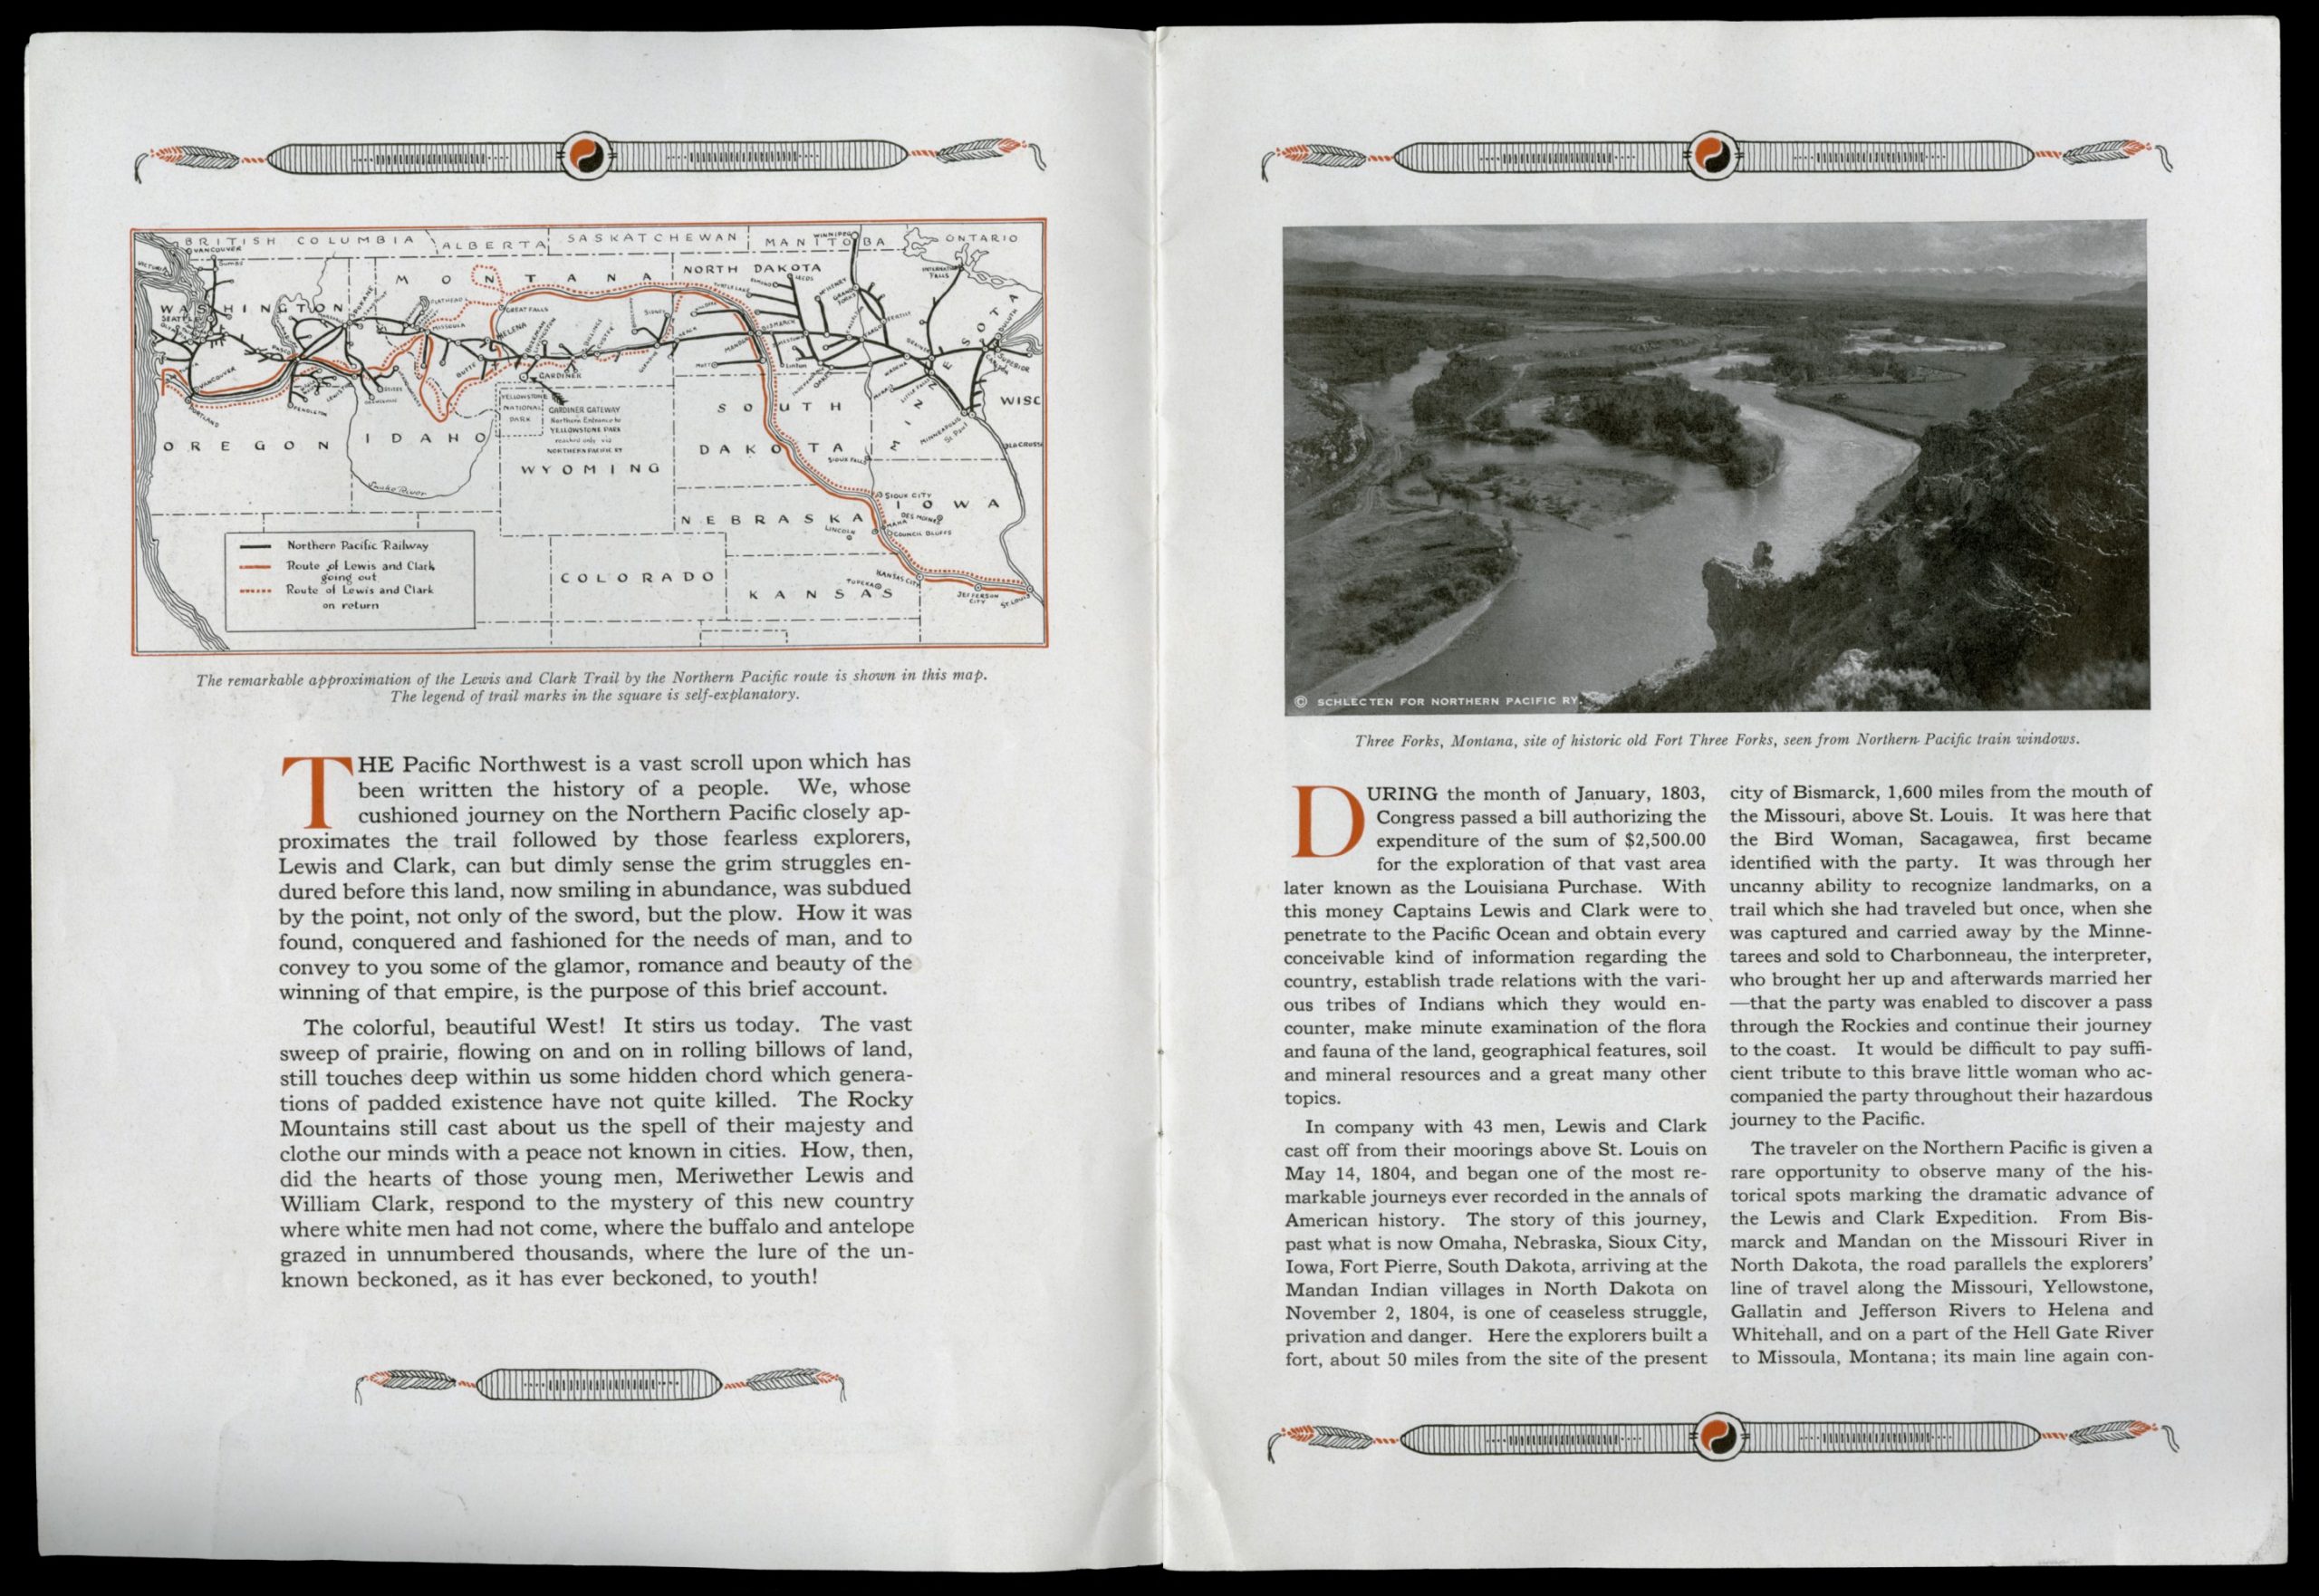 Two-page spread of the interior of a pamphlet. In the upper left is a railroad map showing routes across the upper western United States. In the upper right is a black-and-white photo of a bend in a river. Below there are paragraphs of text. The headers and footers are decorated with feathers for an "Indian" feel.